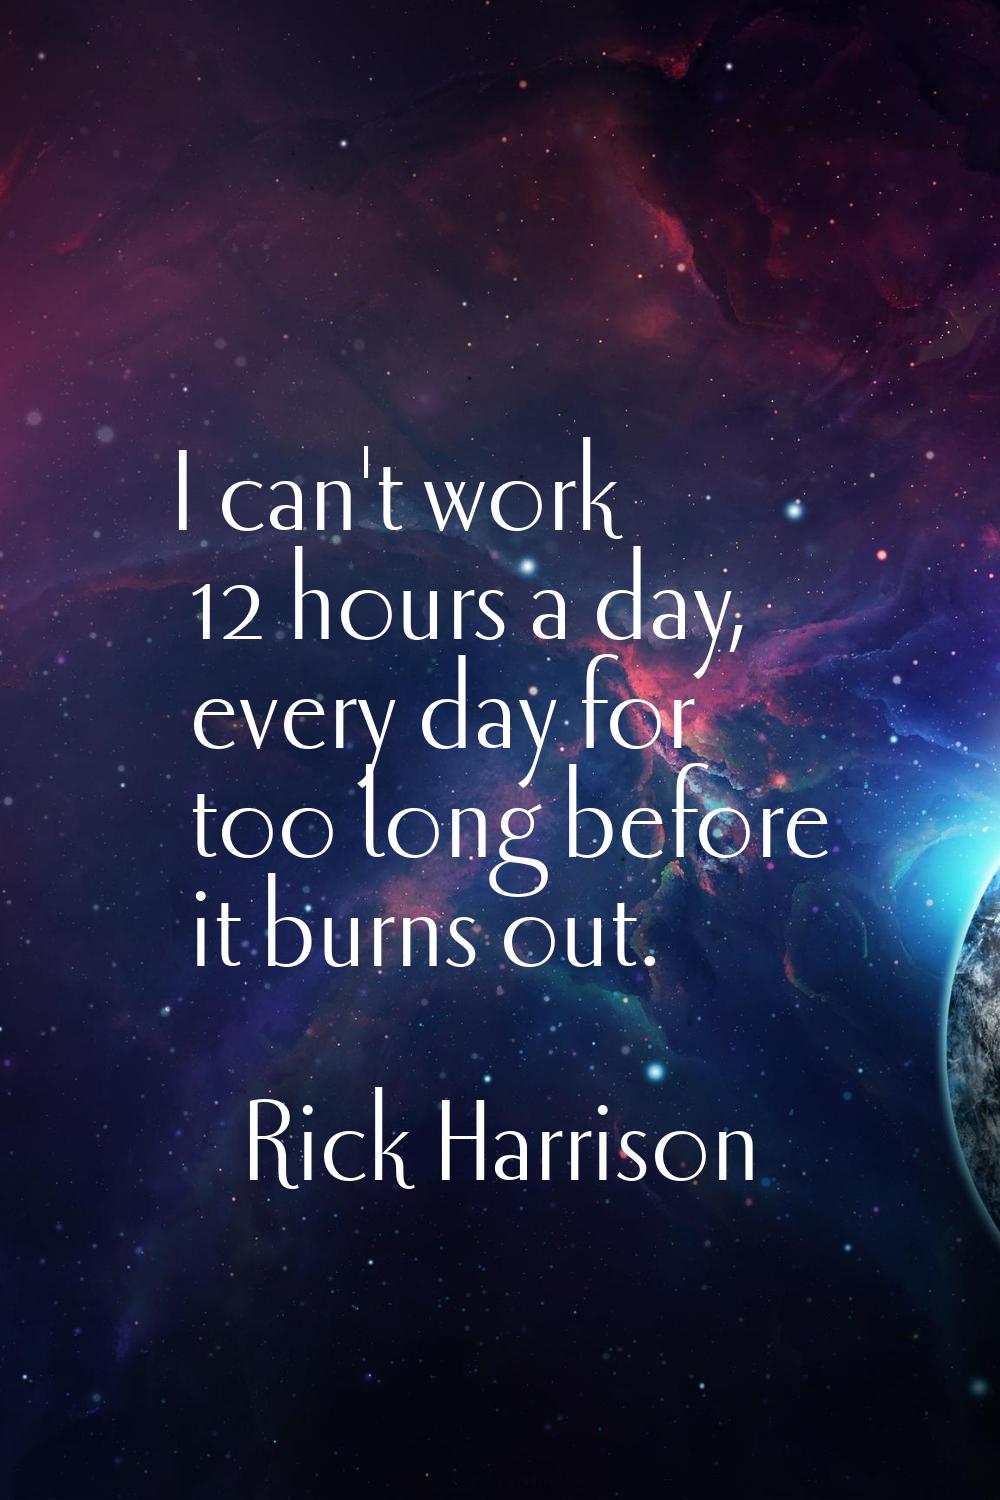 I can't work 12 hours a day, every day for too long before it burns out.